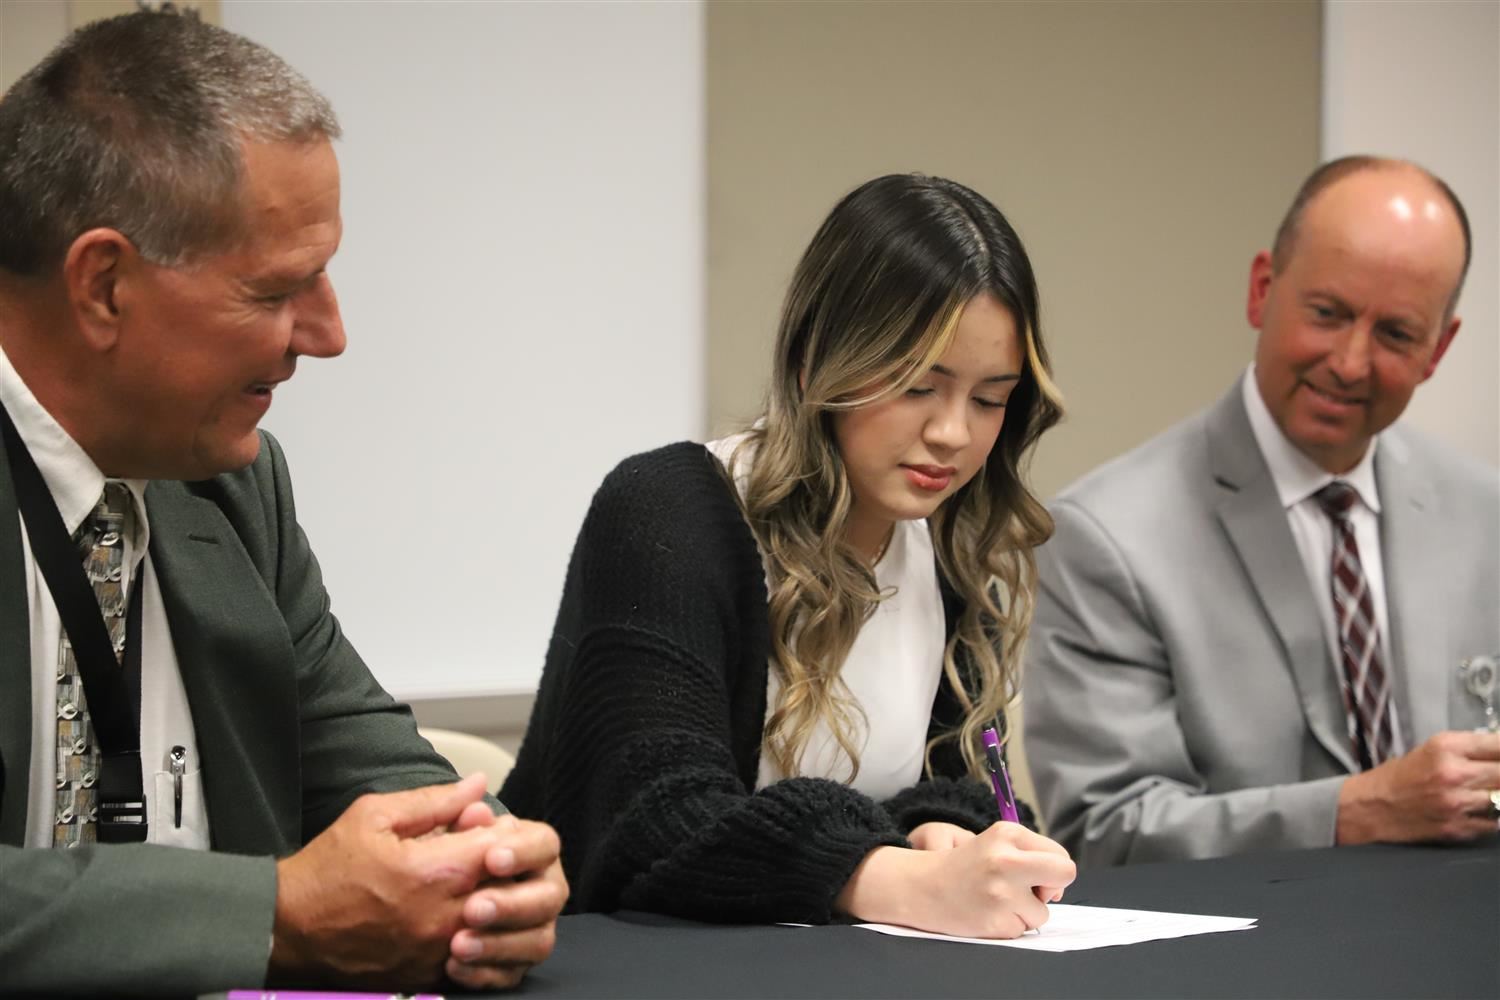 Michelle Fuentes signs Pathback agreement alongside Matt Fisher and Hank McFarland